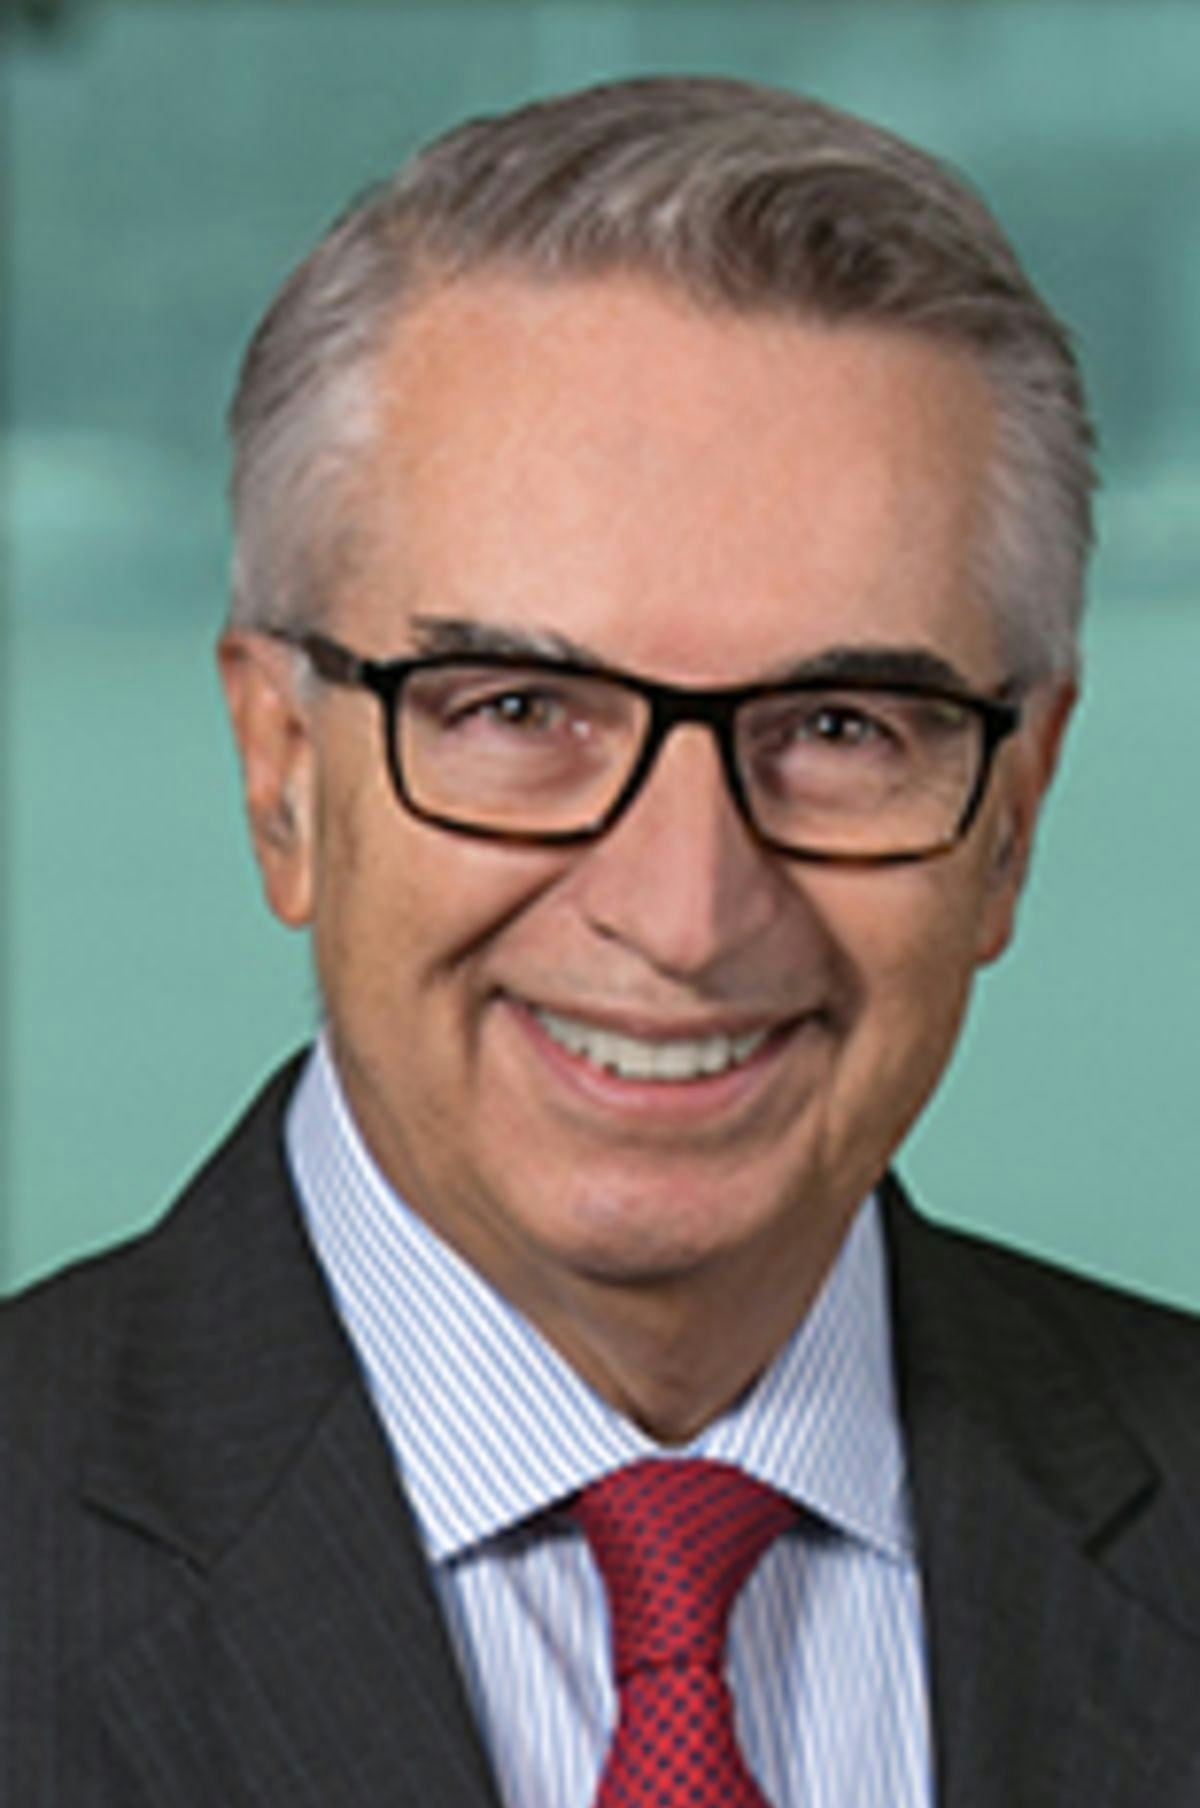 Headshot of Dr. Prastacos with the New York City skyline in the background.